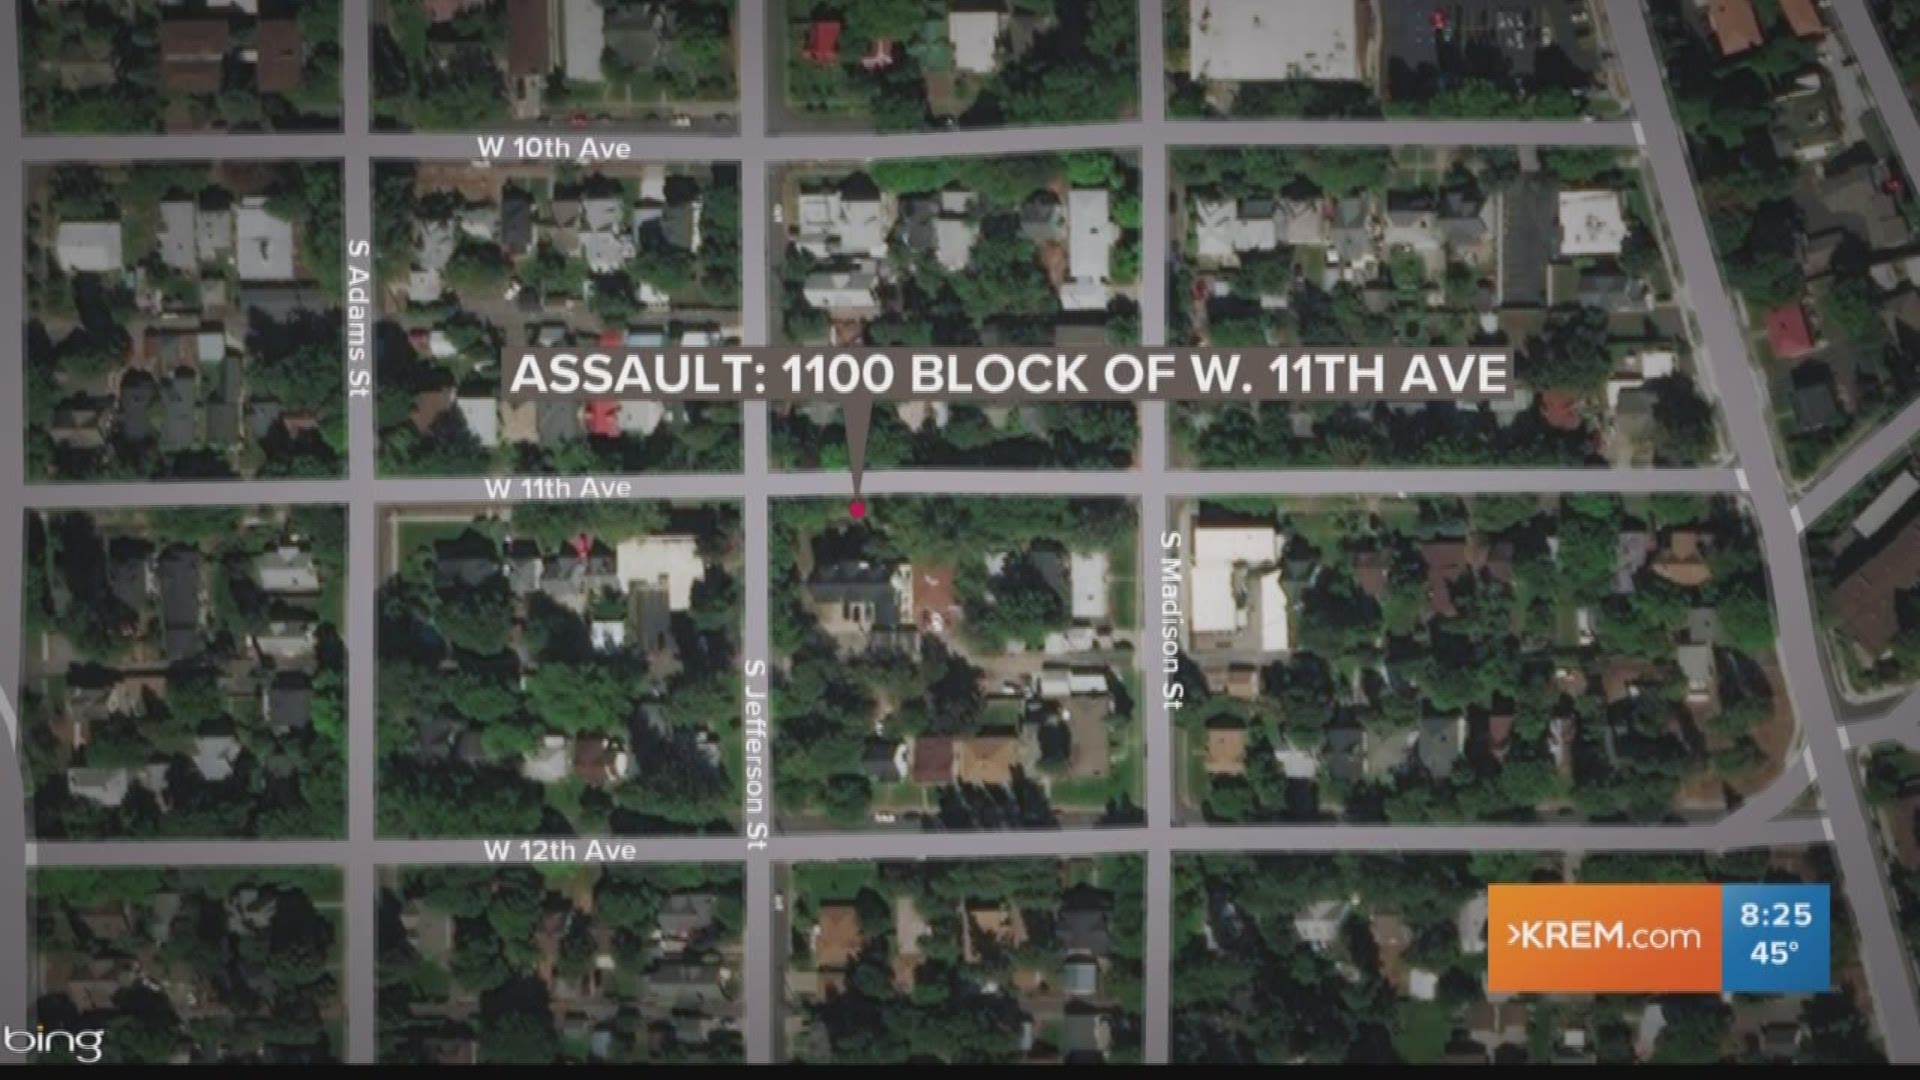 A man told police that two people assaulted him using a gun and shot at him as he fled the apartment on W. 11th Avenue and S. Jefferson Street.